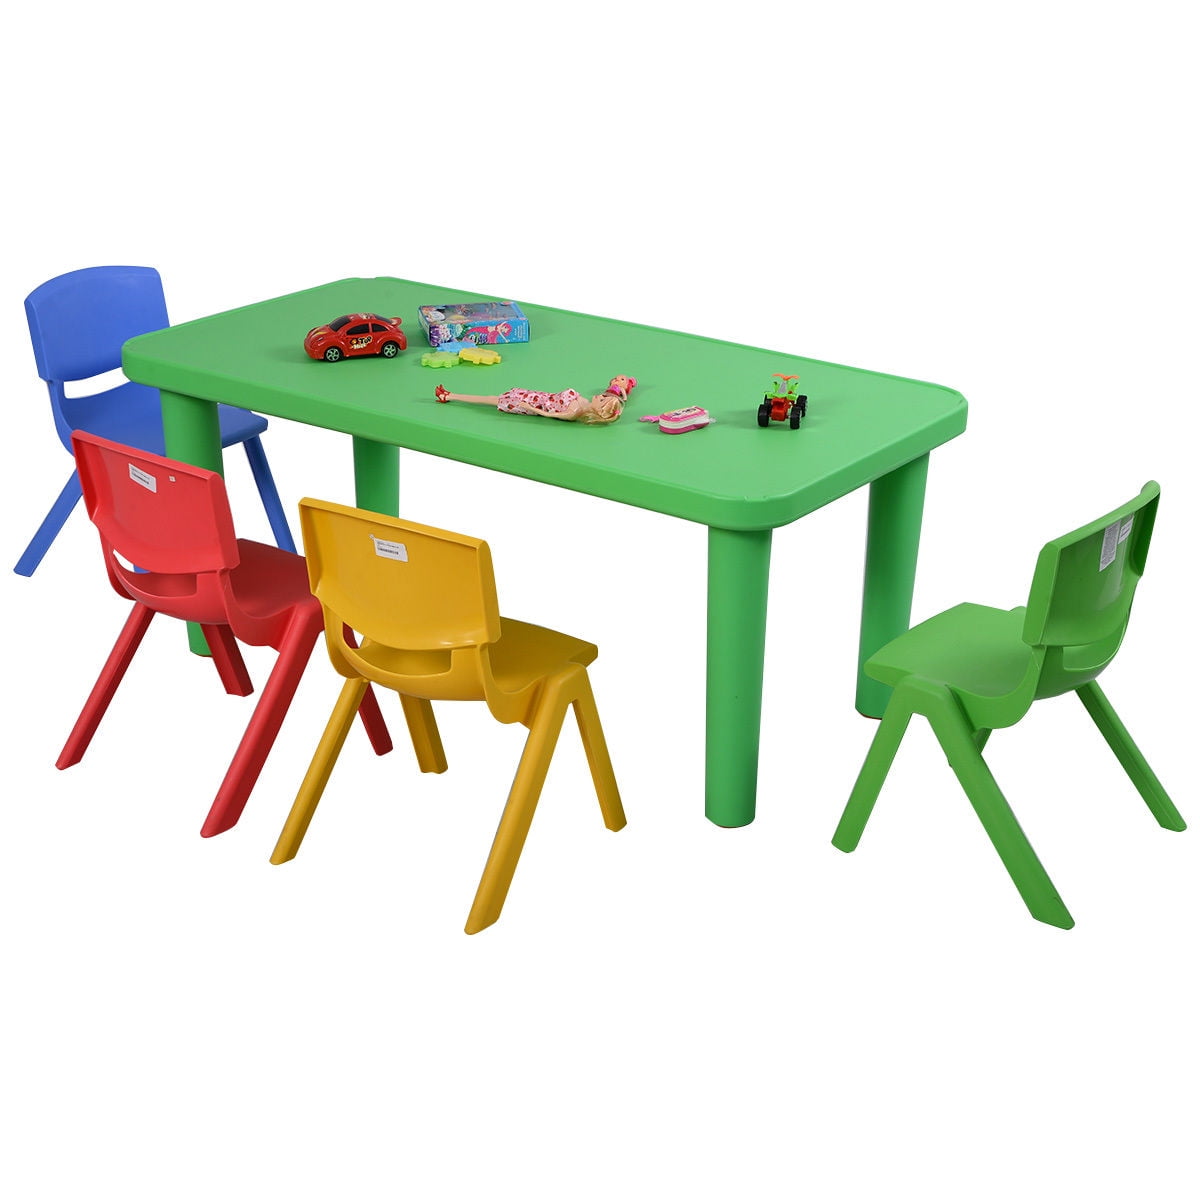 Dollhouse minature Classroom Table and Chair Set for kids ToysBCDE 